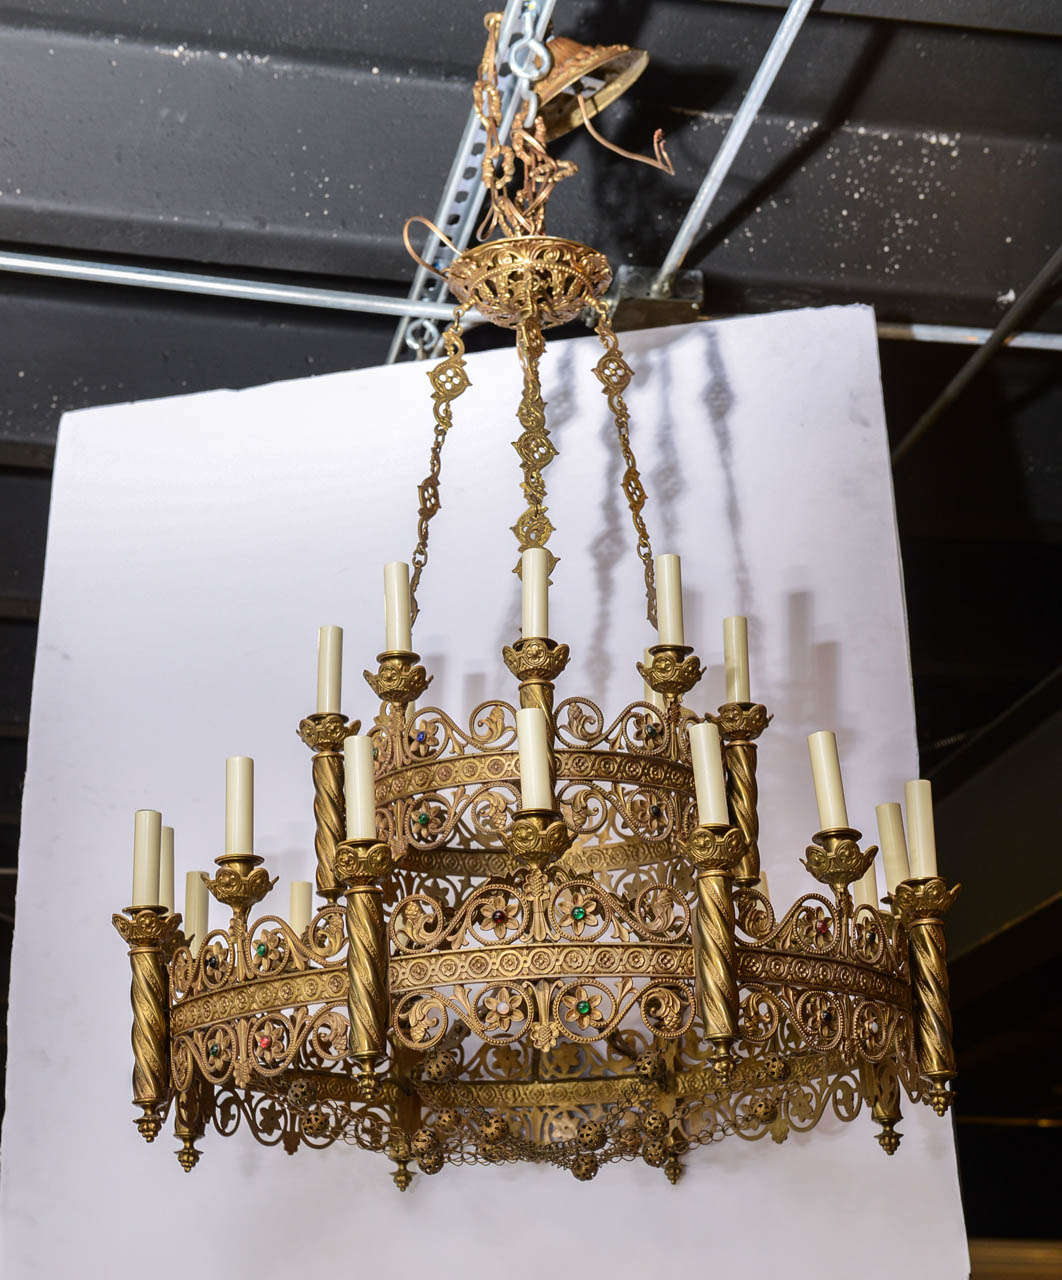 Grand scale Moorish bronze fixture with great attention to detail including multi colored studded stones.  This magnificent chandelier consists of two tiers and twenty four lights.  
The main body of this fixture measures 30 inches in diameter and